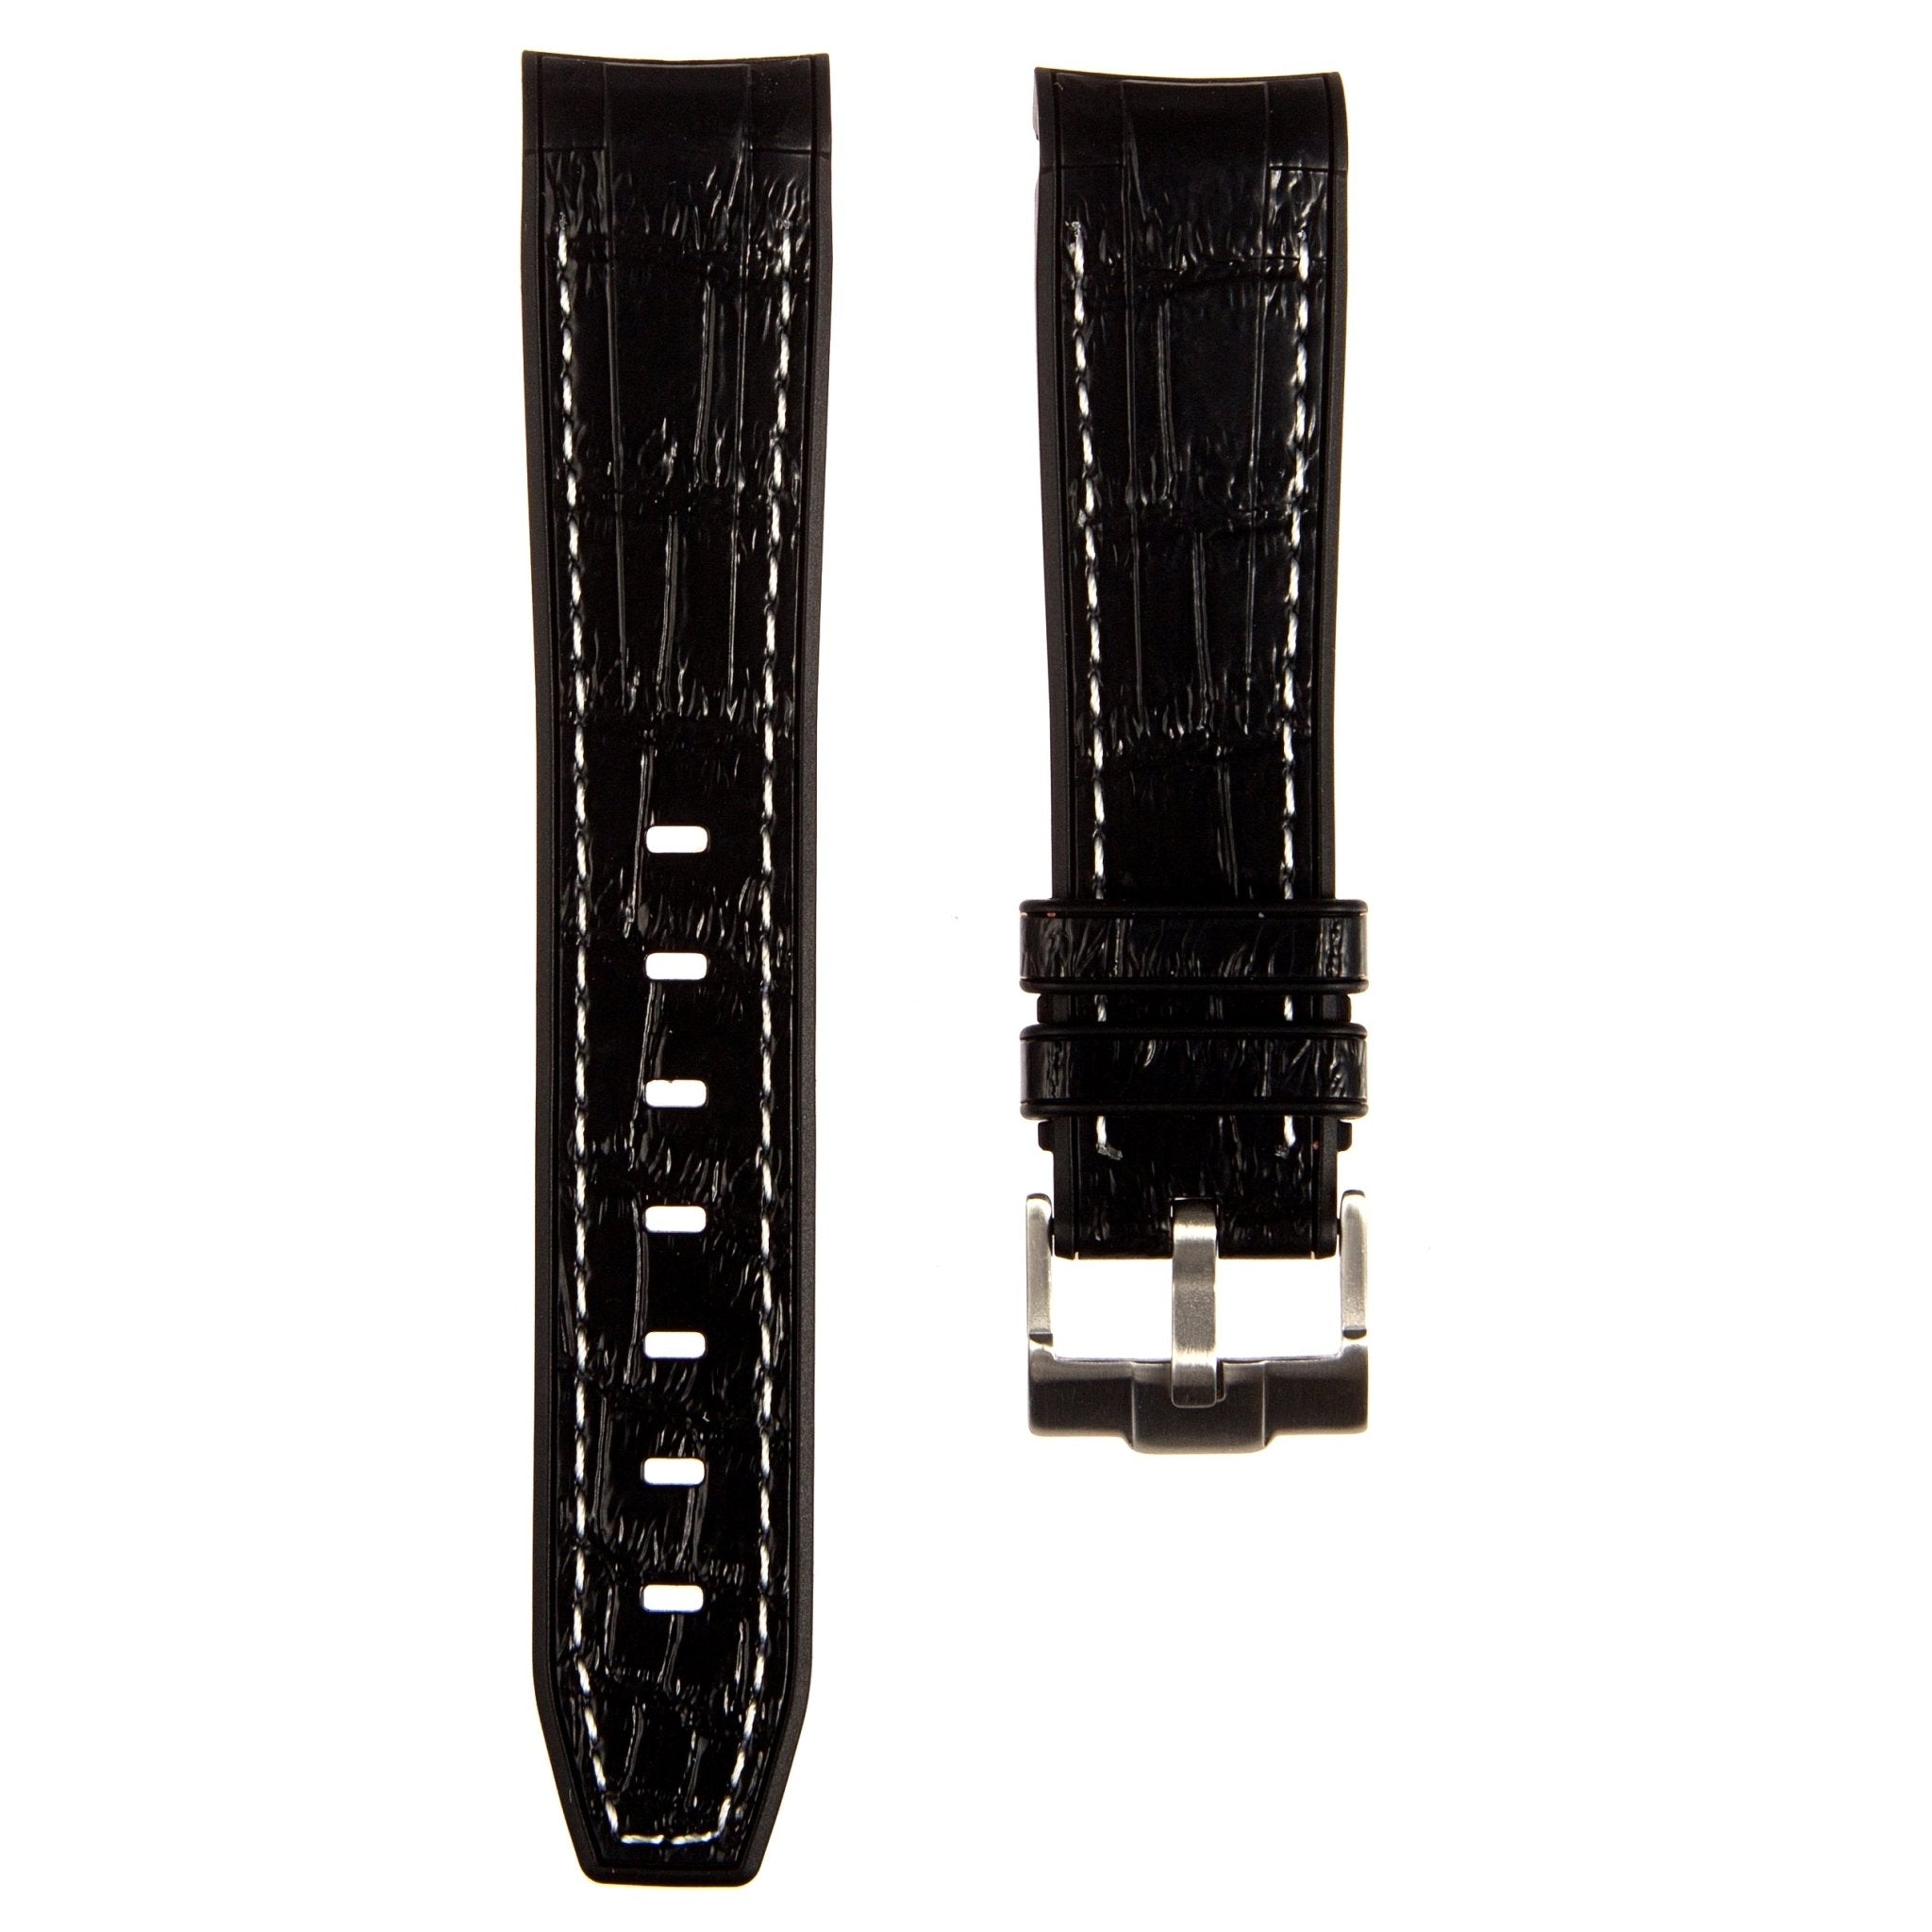 Alligator Embossed Curved End Premium Silicone Strap - Compatible with Rolex Submariner - Black with White Stitch (2406) -StrapSeeker